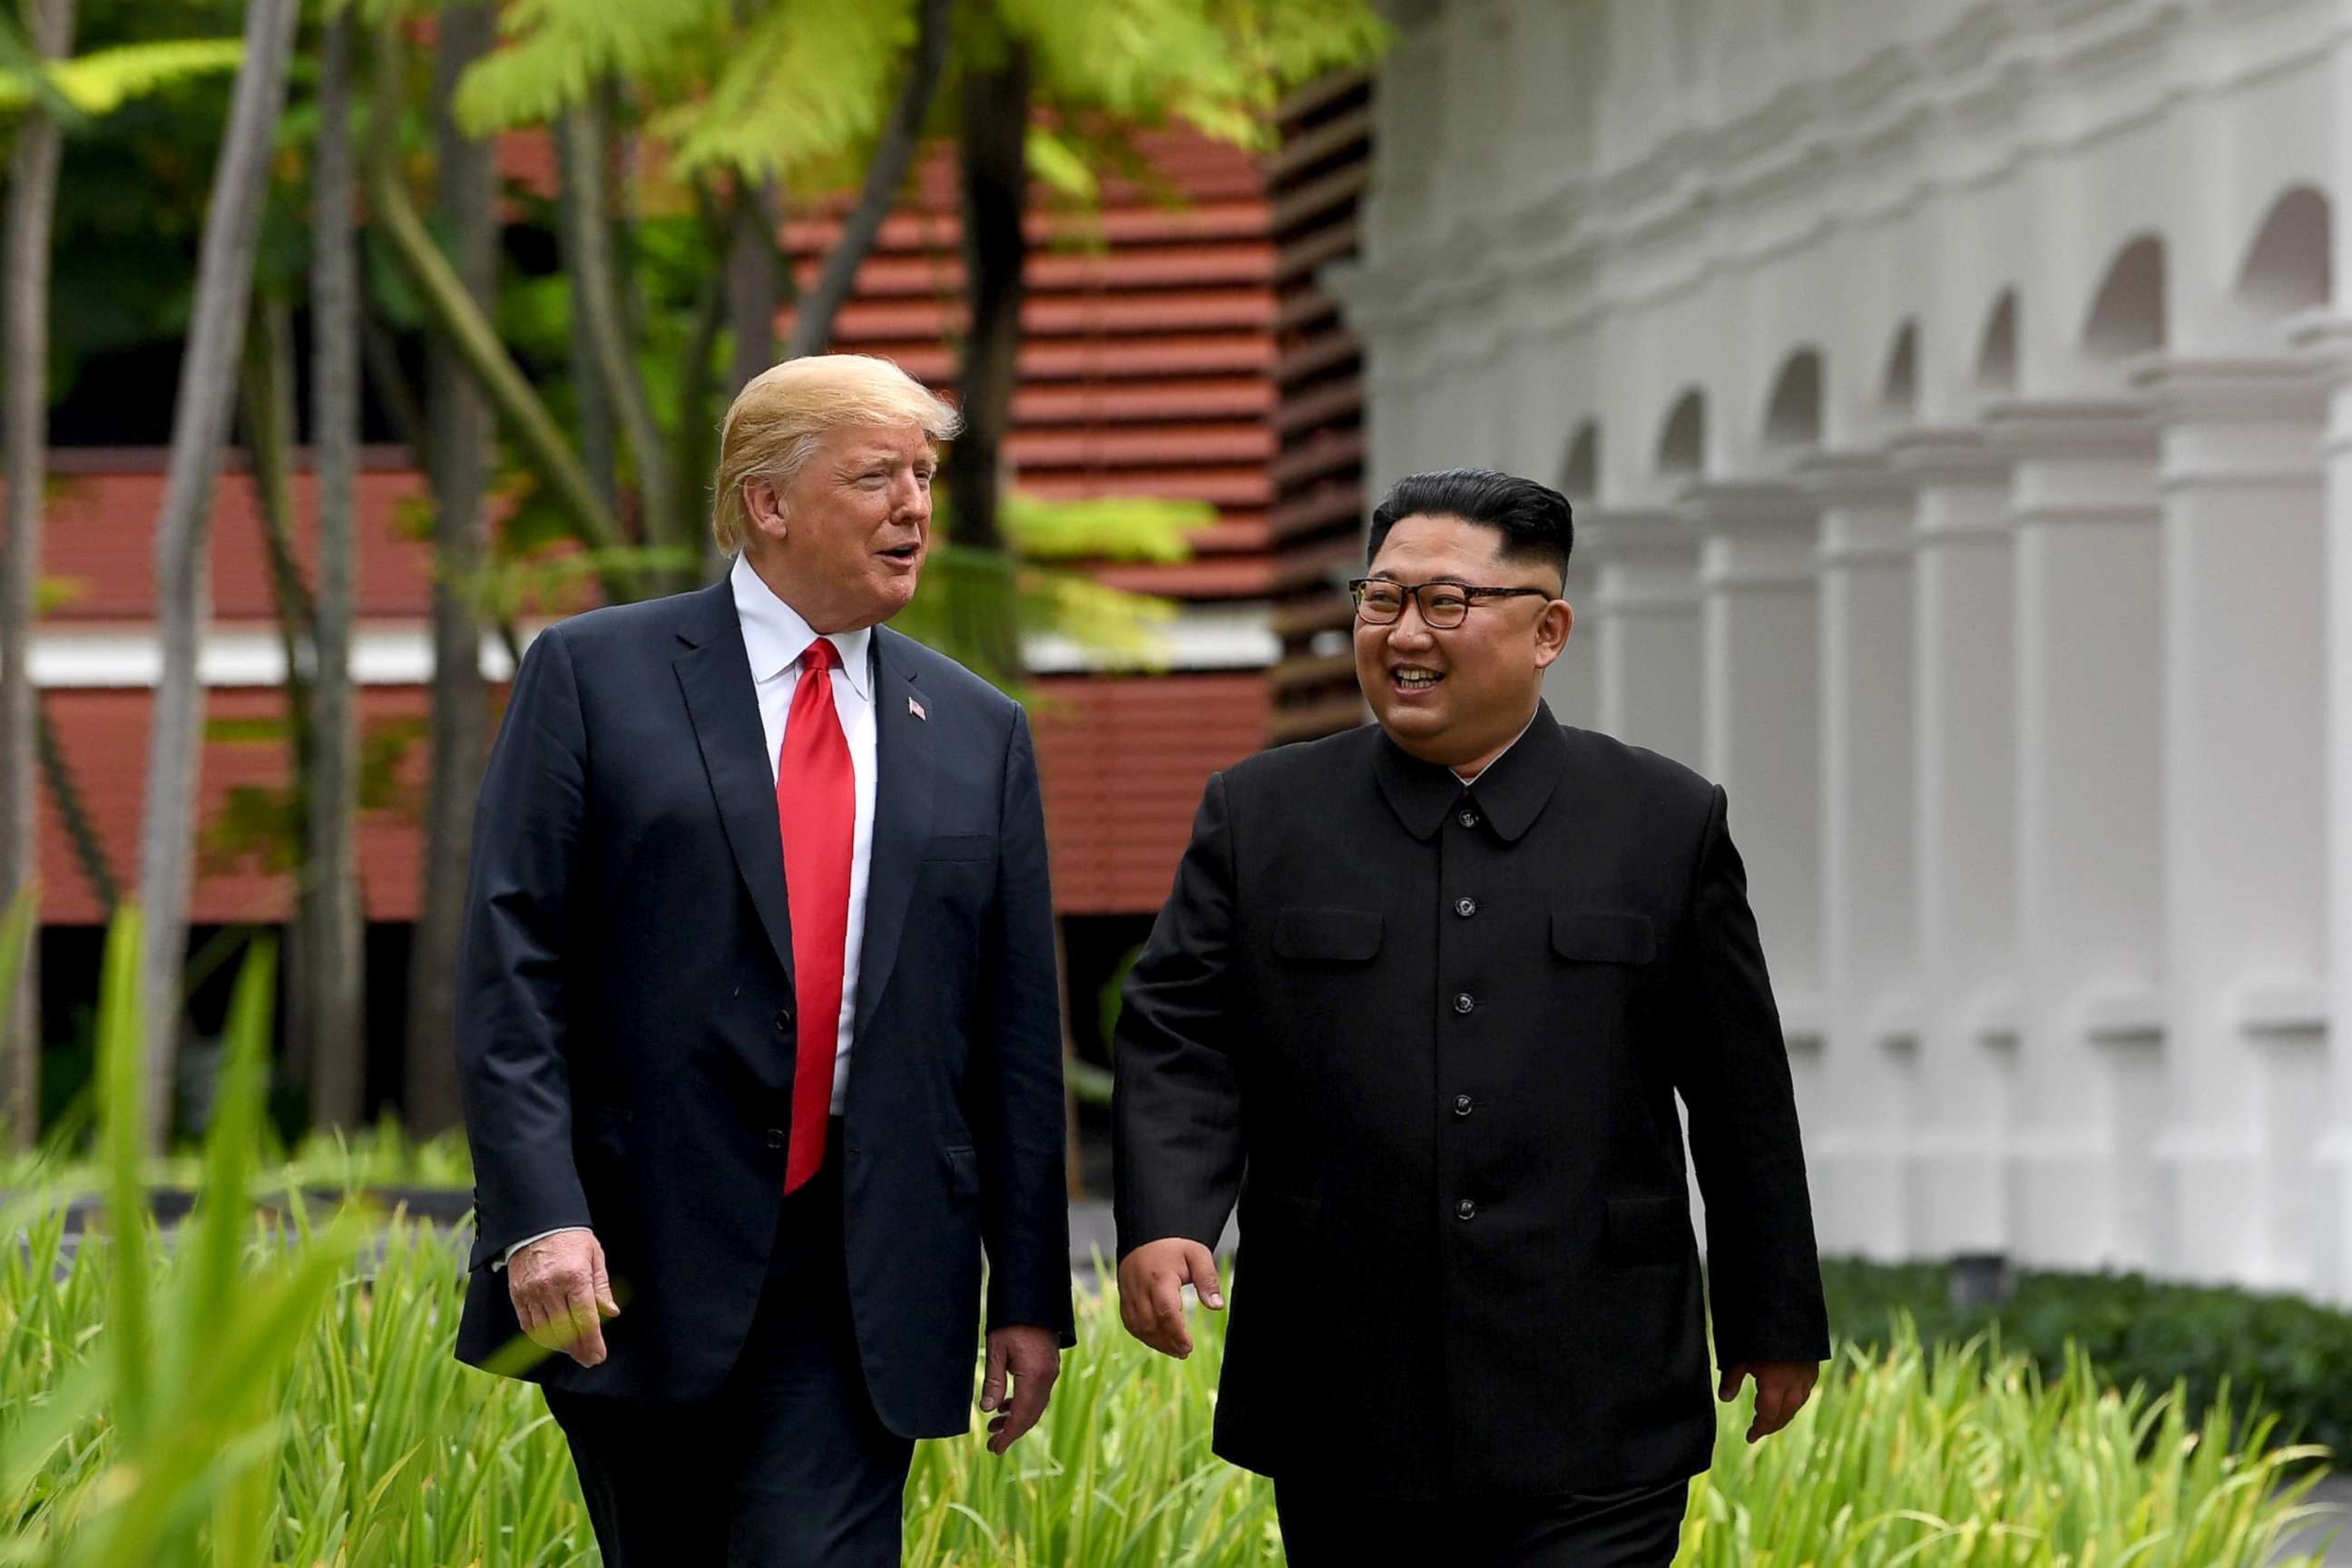 PHOTO: North Korea's leader Kim Jong Un walks with President Donald Trump, left, during a break in talks at their historic US-North Korea summit at the Capella Hotel on Sentosa island in Singapore, June 12, 2018.